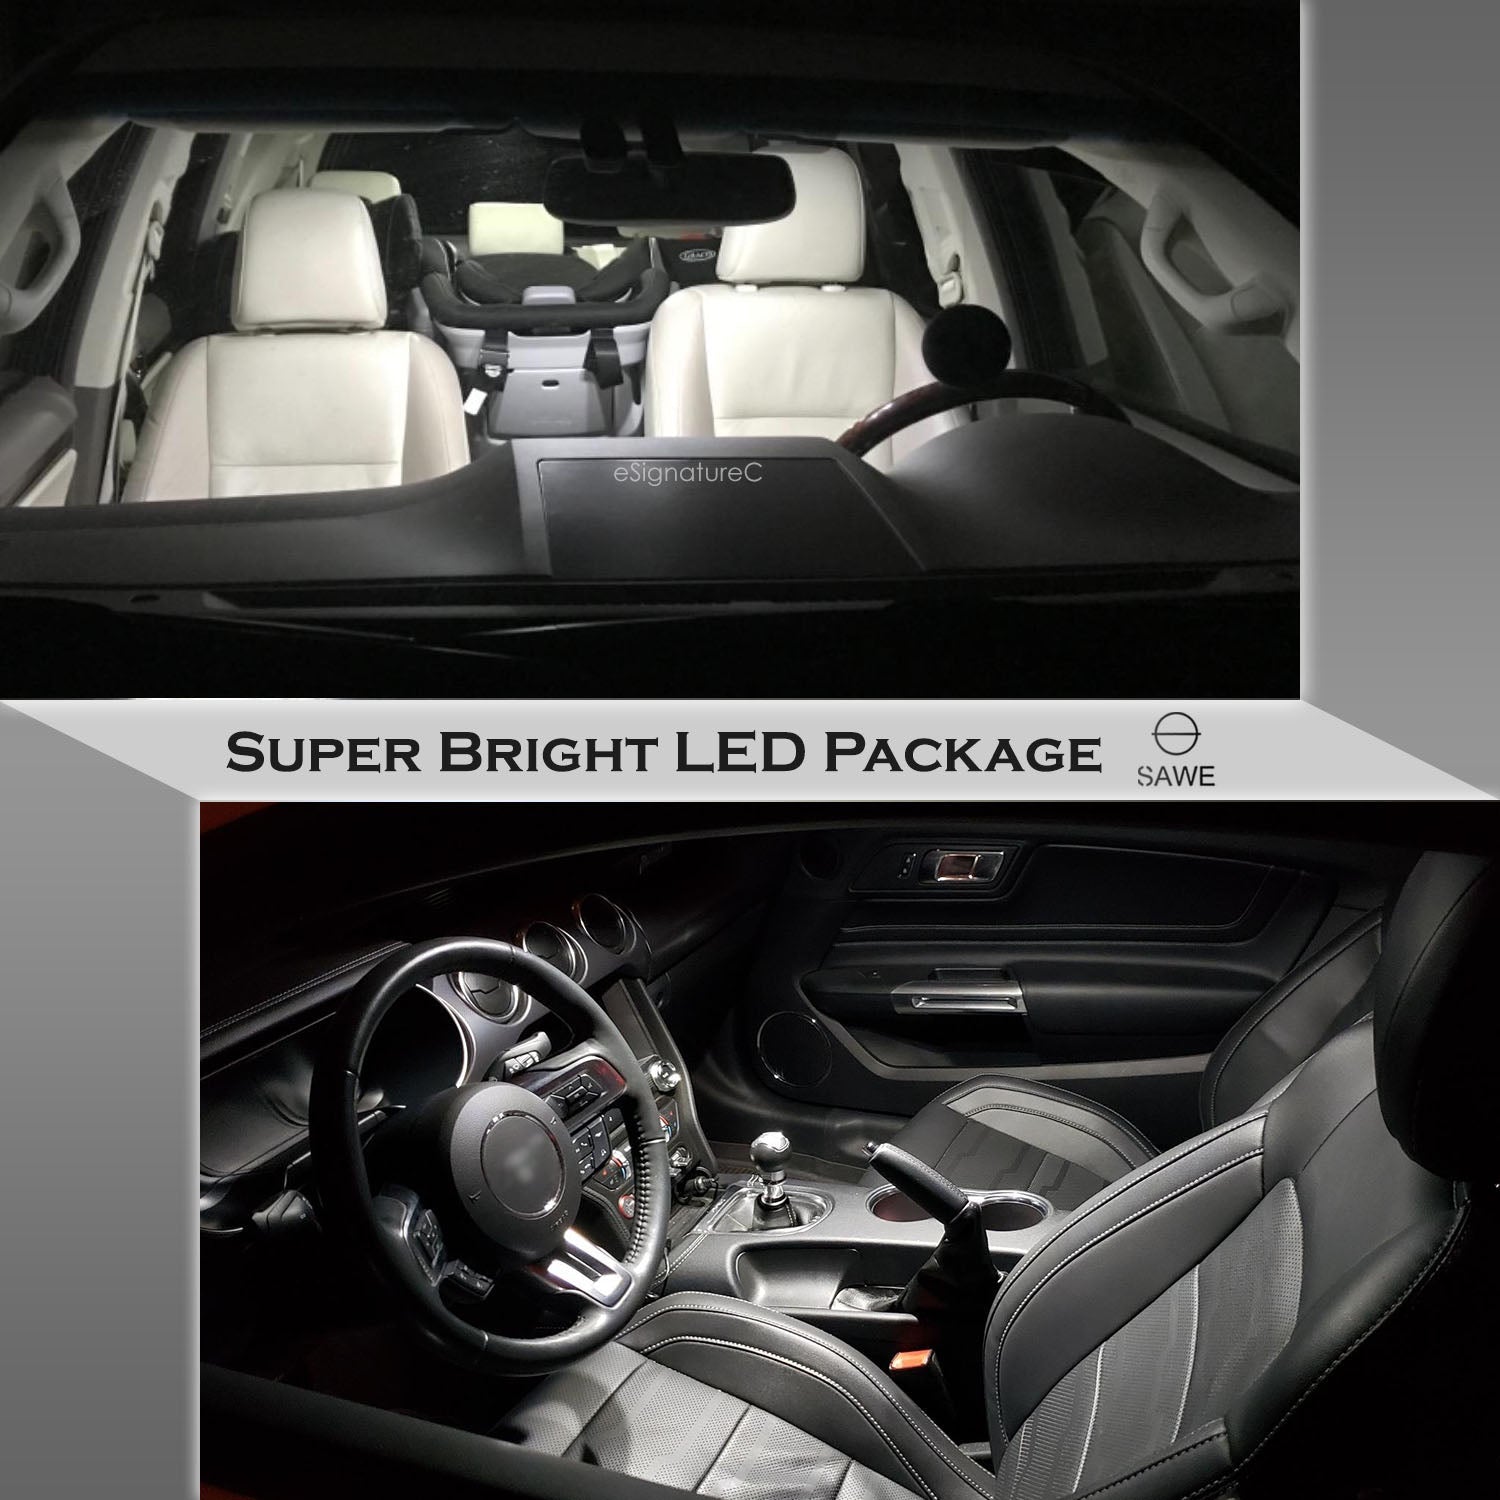 For Audi A8 S8 Interior LED Lights - Dome & Map Light Bulb Package Kit for 2003 - 2009 - White